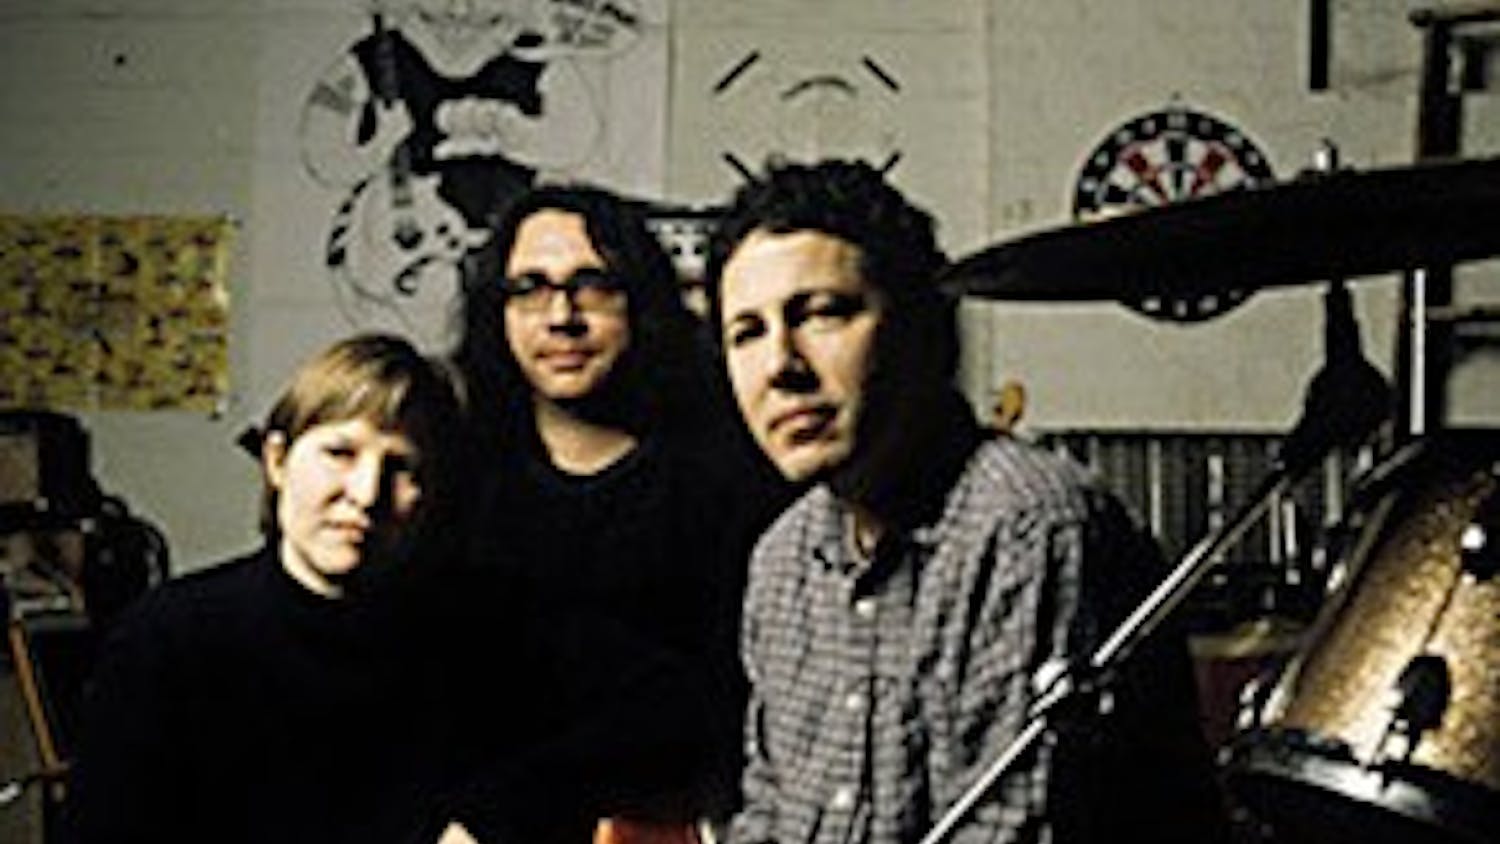 Like the name of one of Yo La Tengo's songs, the band has a "Big Day Coming" with their upcoming Bloomington show.